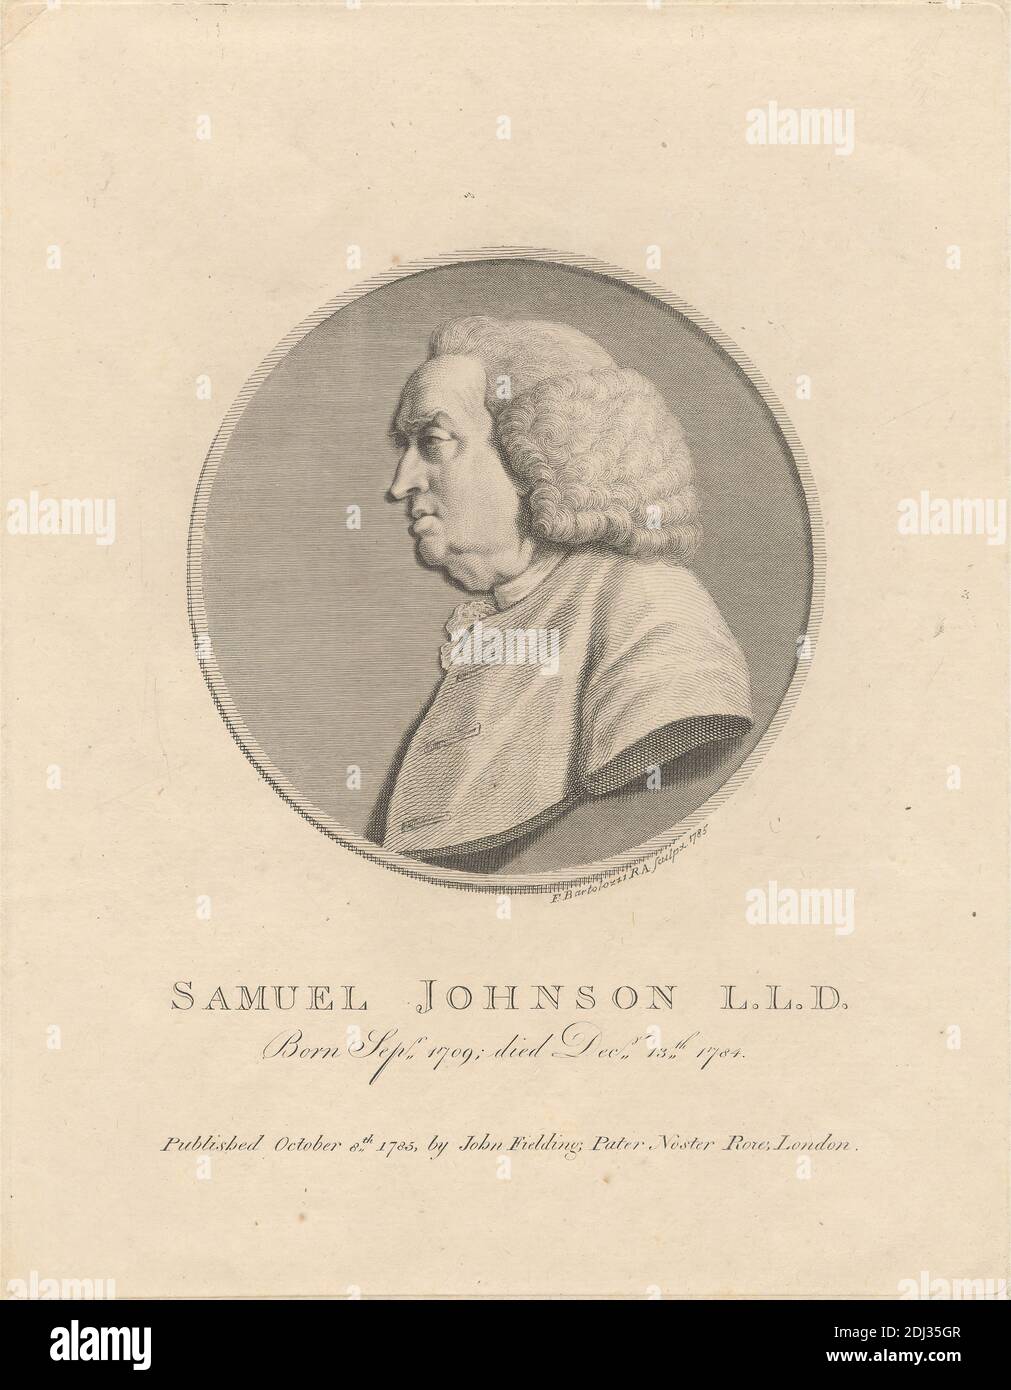 Samuel Johnson, Print made by Francesco Bartolozzi RA, 1728–1815, Italian, active in Britain (1764–99), after Sir Joshua Reynolds RA, 1723–1792, British, Published by John Fielding, acitve 1779–1809, British, 1785, Etching on moderately thick, moderately textured, cream laid paper, Sheet: 10 1/4 x 7 7/8 inches (26 x 20 cm), Plate: 9 15/16 x 7 11/16 inches (25.3 x 19.5 cm), and Image: 4 15/16 x 4 15/16 inches (12.6 x 12.5 cm), author, bust, circle (plane figure), costume, essayist, lexicographer, man, medallion (medal), poet, portrait, tondo Stock Photo